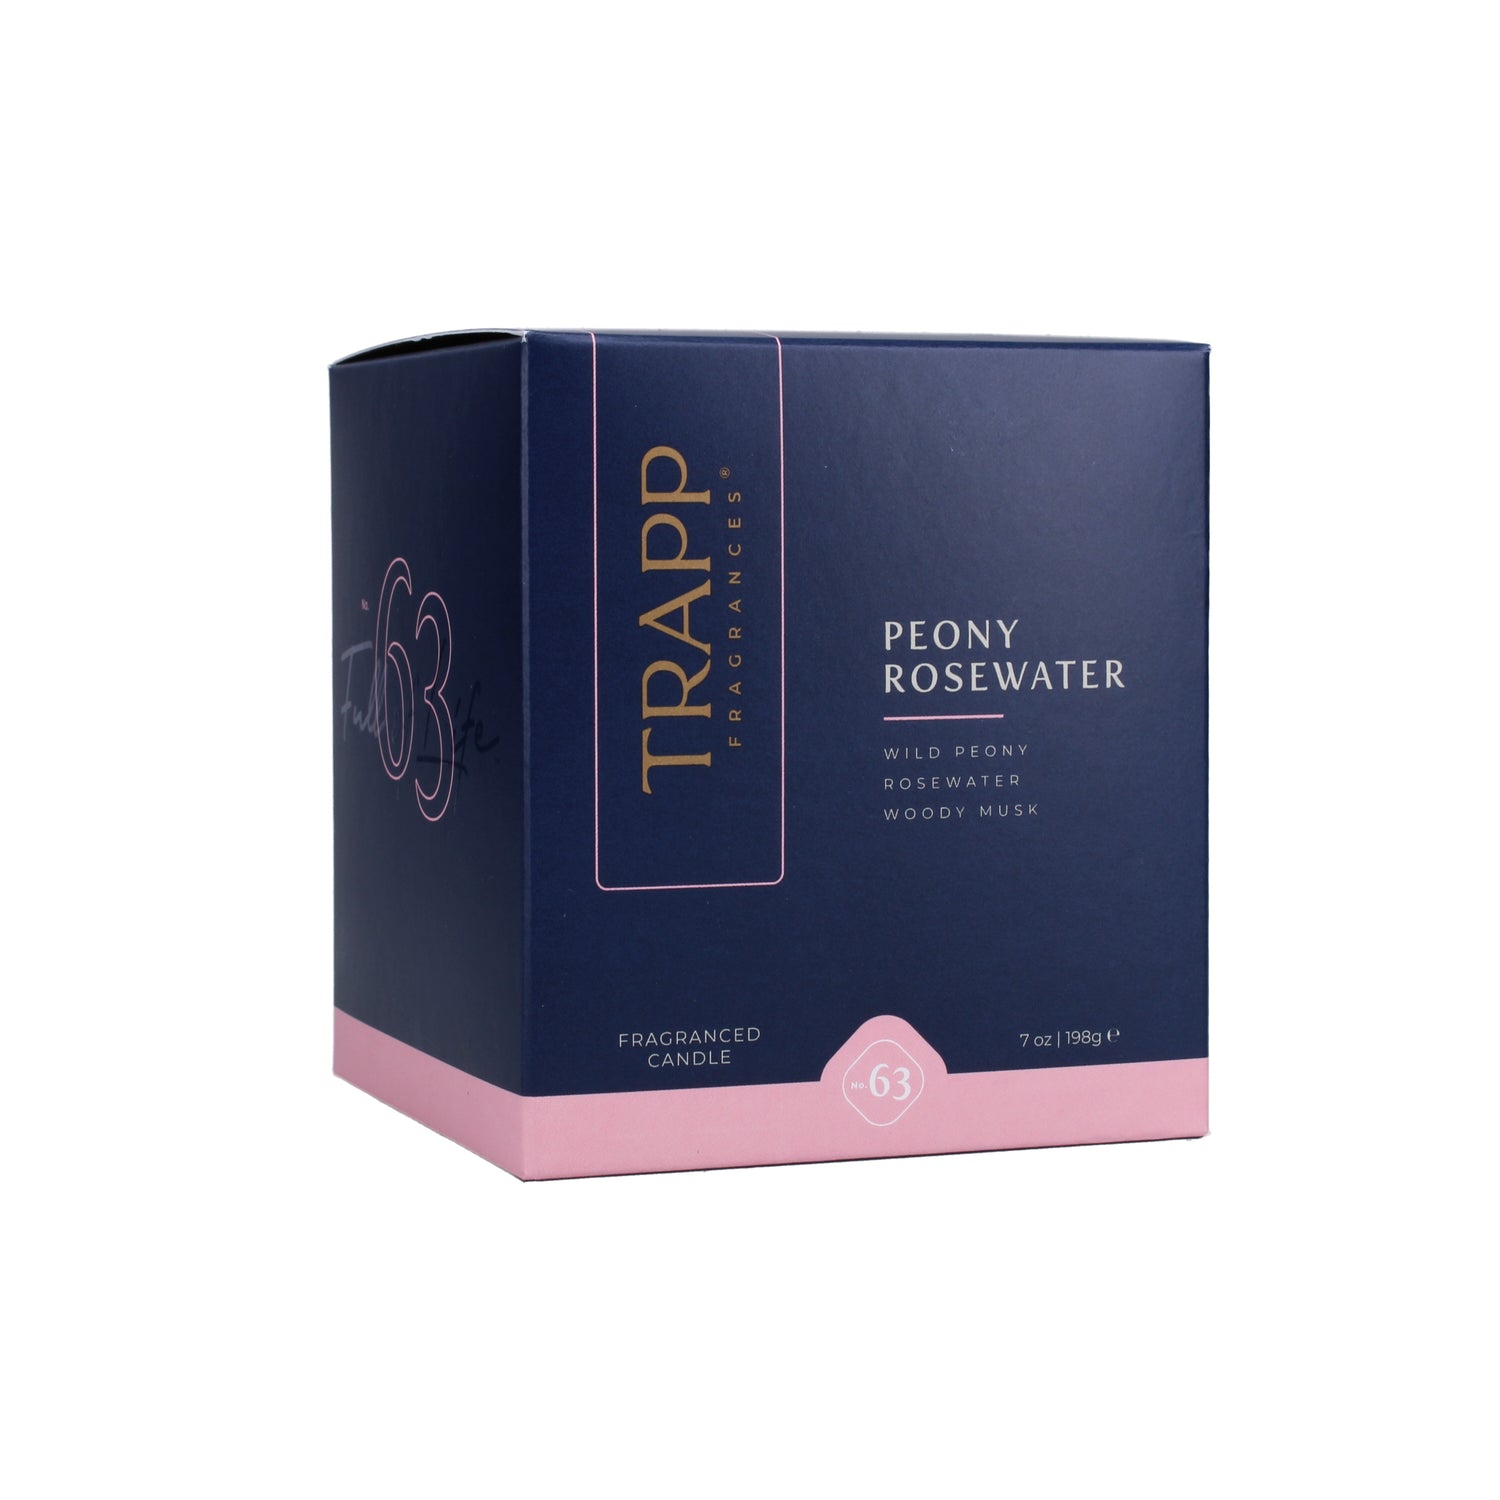 No. 63 Peony Rosewater 7 oz. Candle in Signature Box Image 7